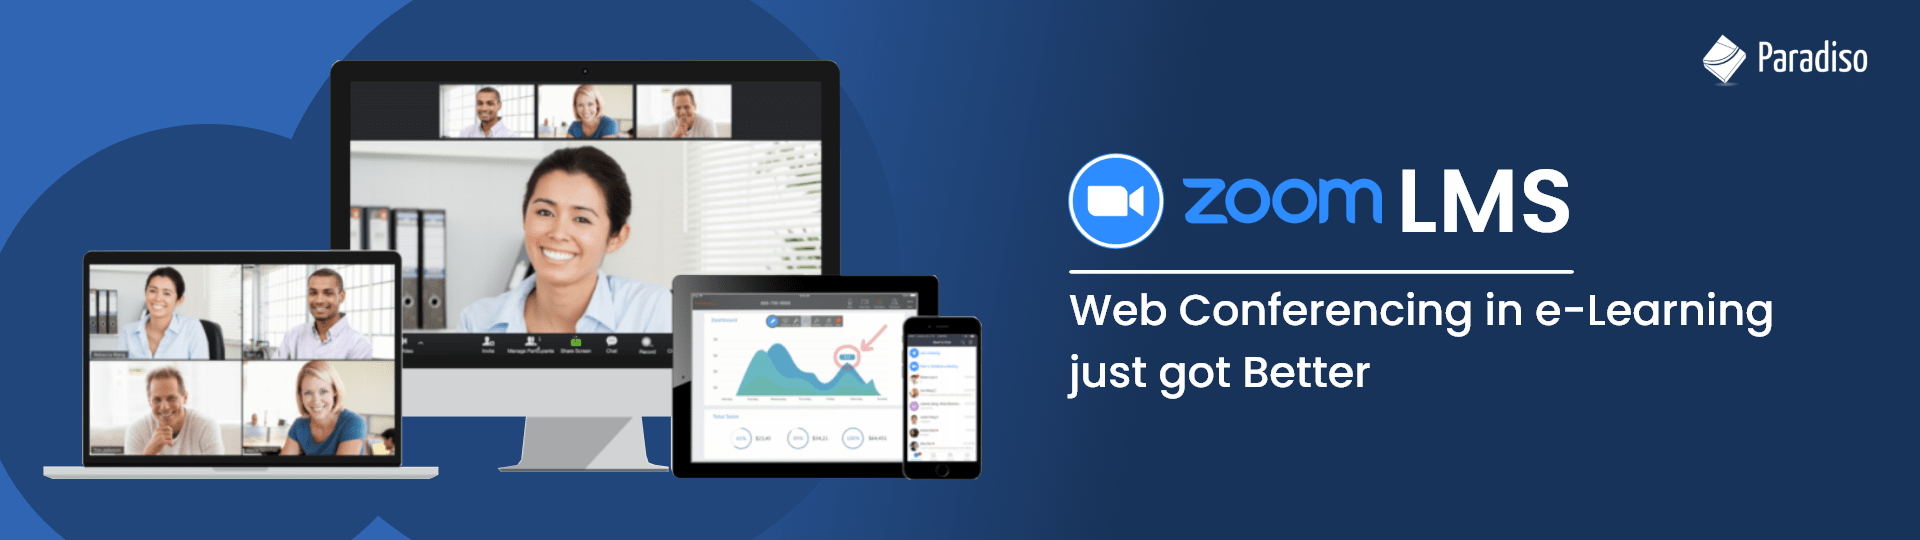 Zoom LMS – Web Conferencing in e-Learning just got Better